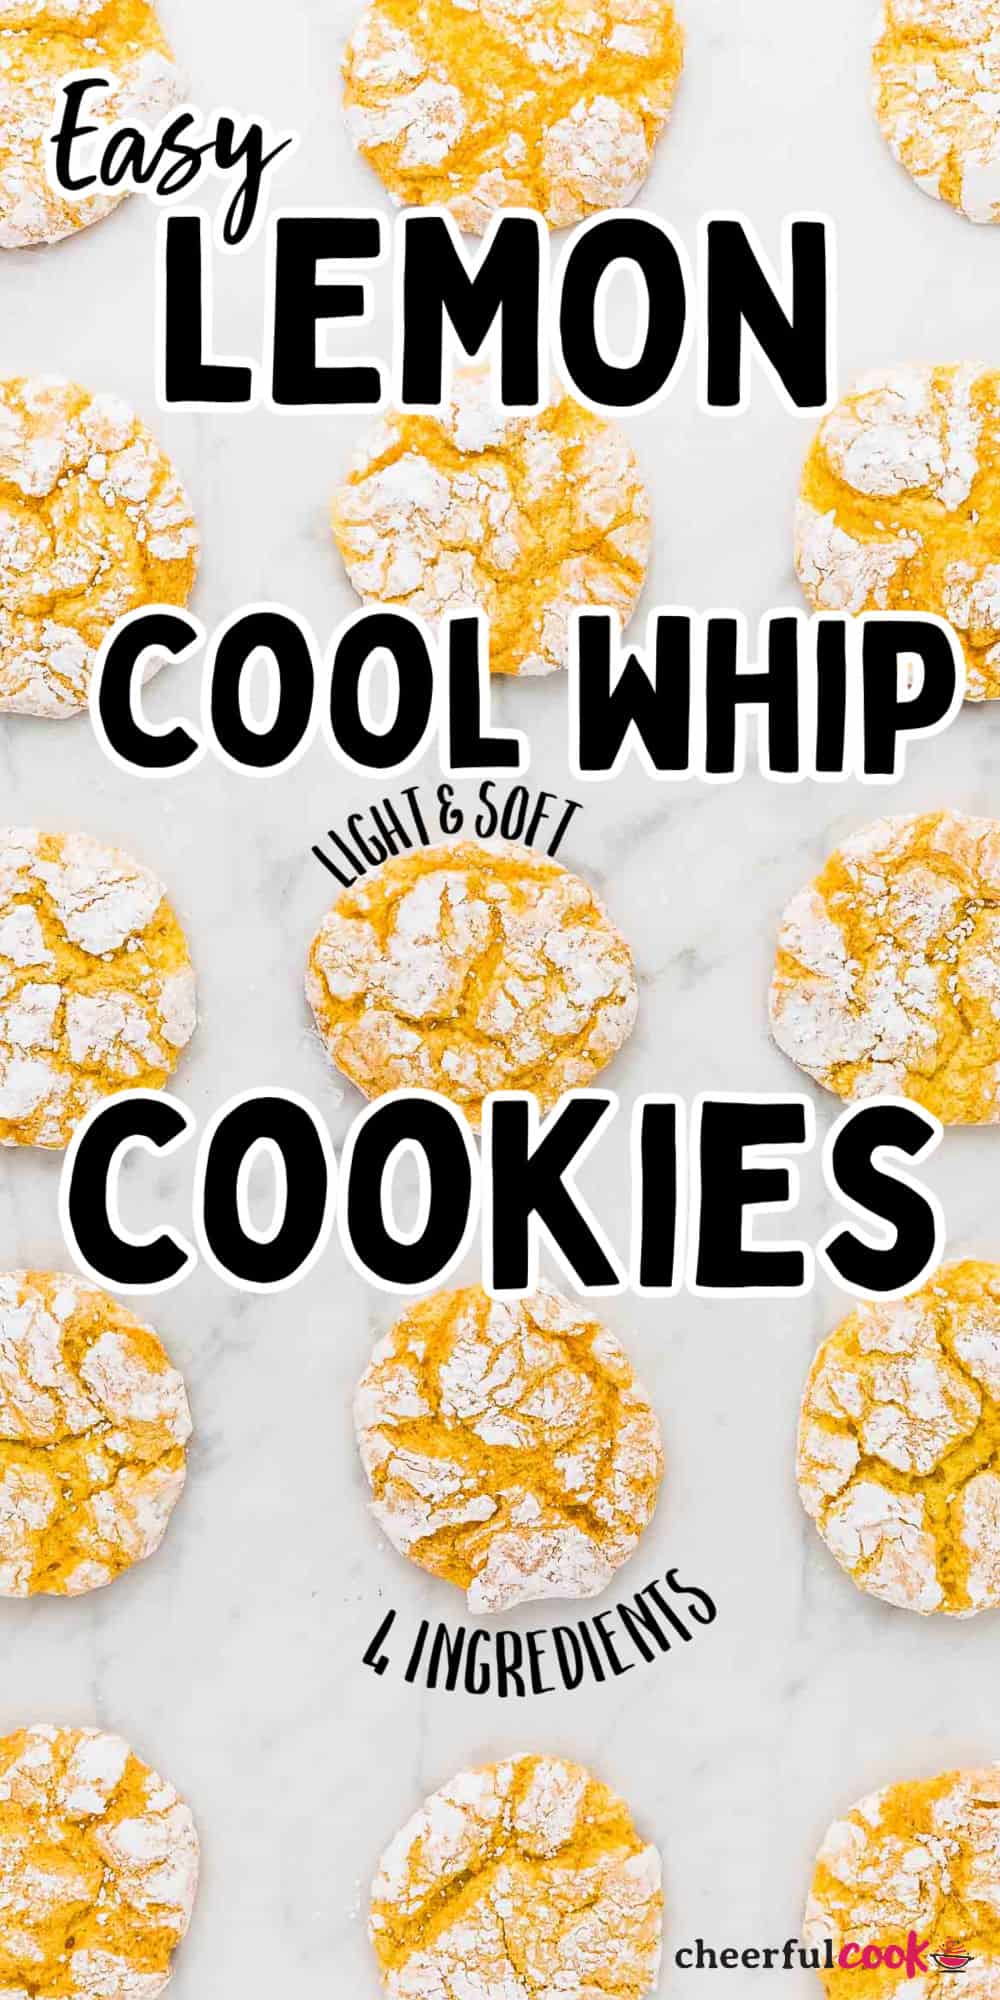 This soft-baked, cakelike Cool Whip Cookie recipe is the ultimate 4 ingredient cookie recipe! These easy-to-make, deliciously chewy lemon cake mix cookies make a great dessert, snack, or lunchtime treat. #cheerfulcook #coolwhipcookies #cakemixcookies #lemoncoolwhipcookies #easyrecipe #sugarcookies #cookies via @cheerfulcook